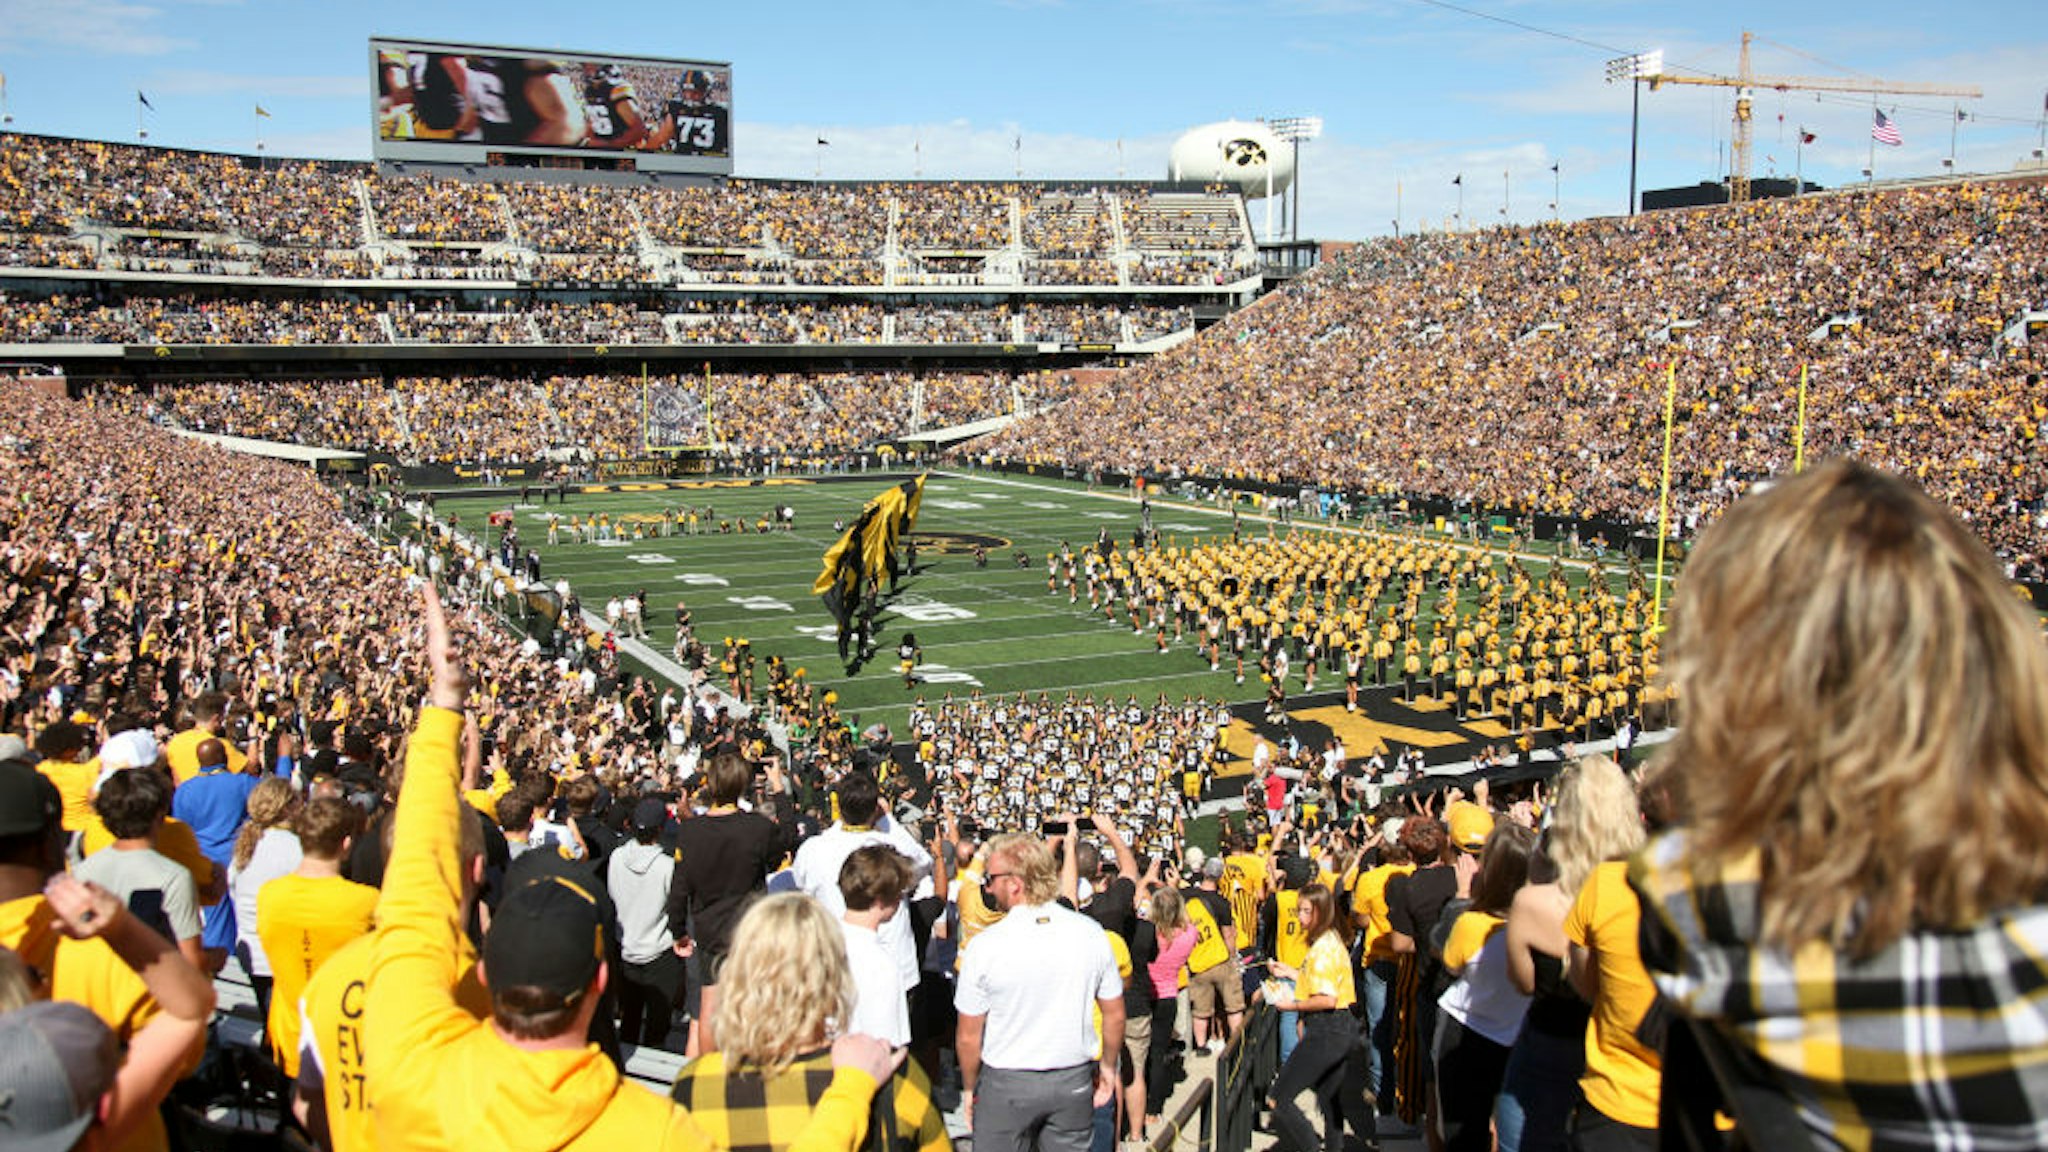 IOWA CITY, IOWA- SEPTEMBER 25: Fans cheer as players take the field before the match-up bewteen the Iowa Hawkeyes and the Colorado State Rams at Kinnick Stadium on September 25, 2021 in Iowa City, Iowa. (Photo by Matthew Holst/Getty Images)